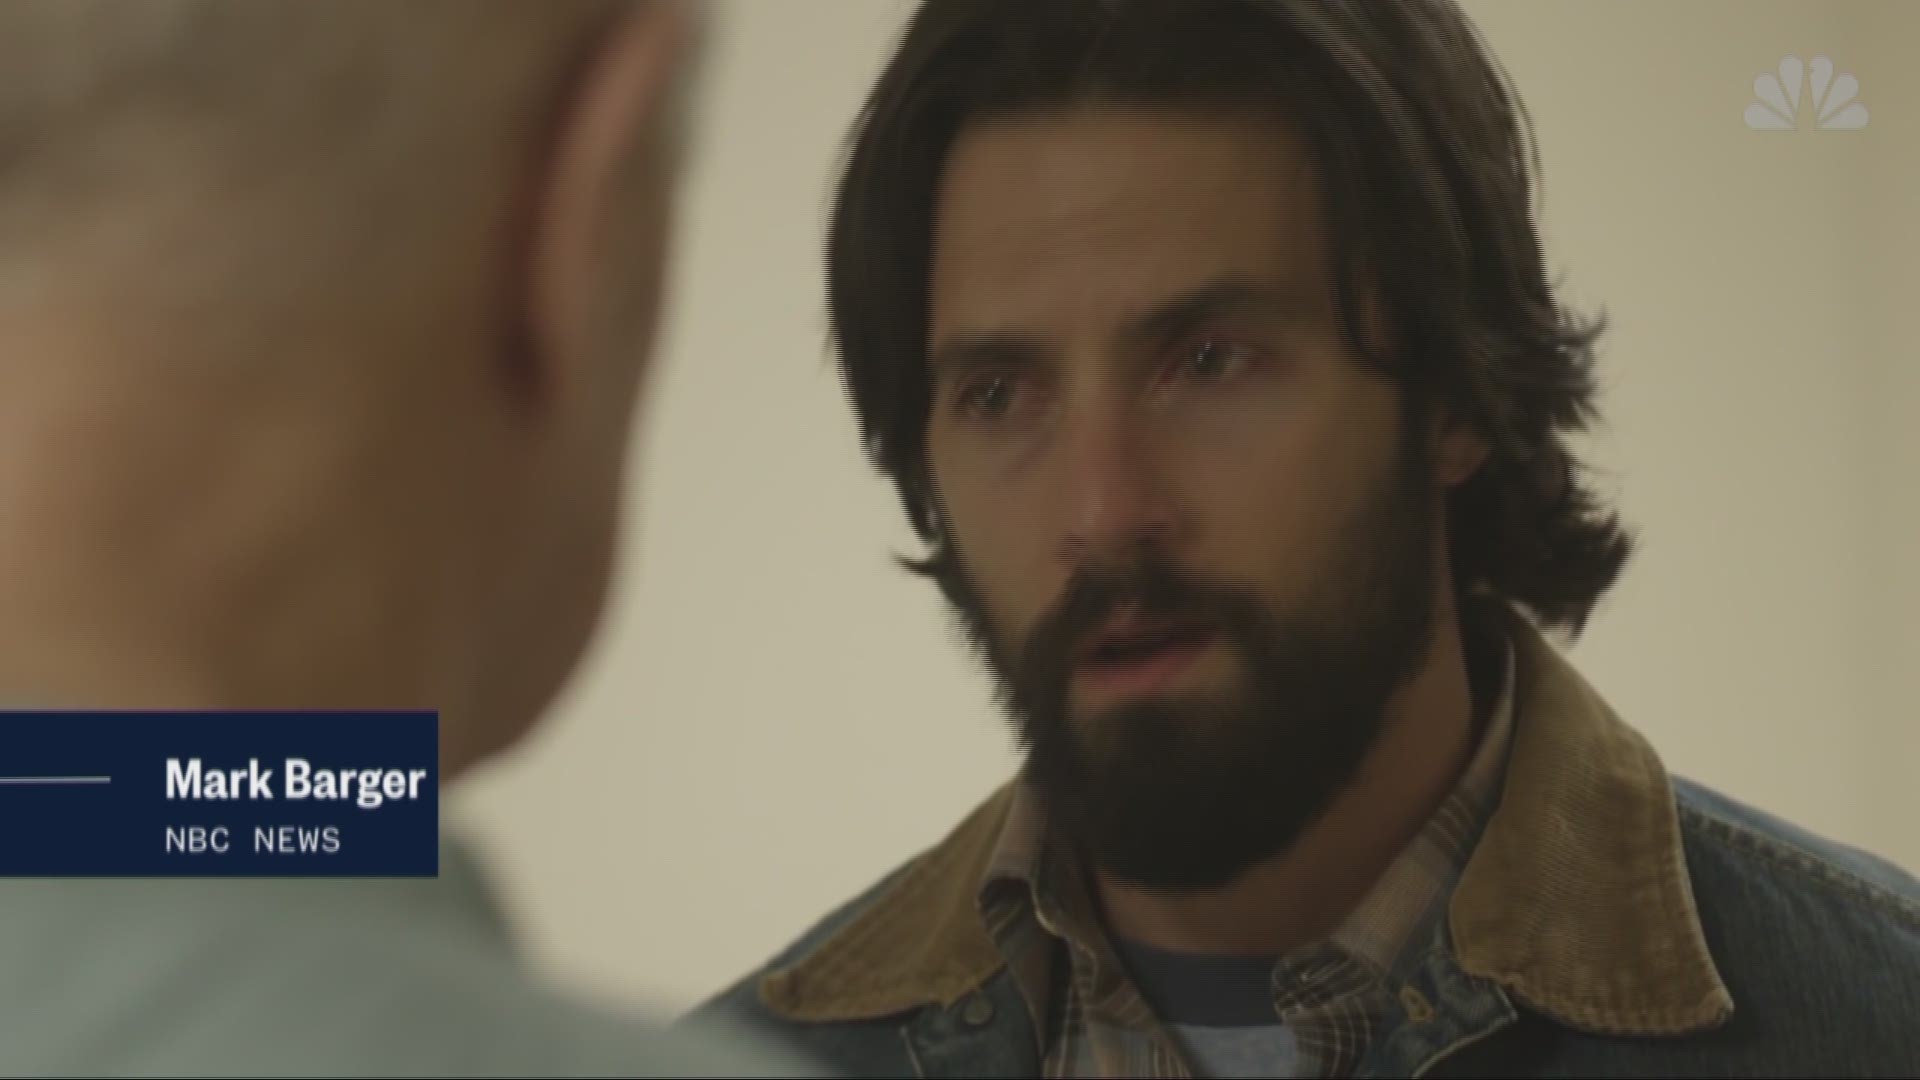 NBC's Mark Barger previews the season premiere of "This is Us" returning tonight, as the lives of the Pearson family enter into a third season.